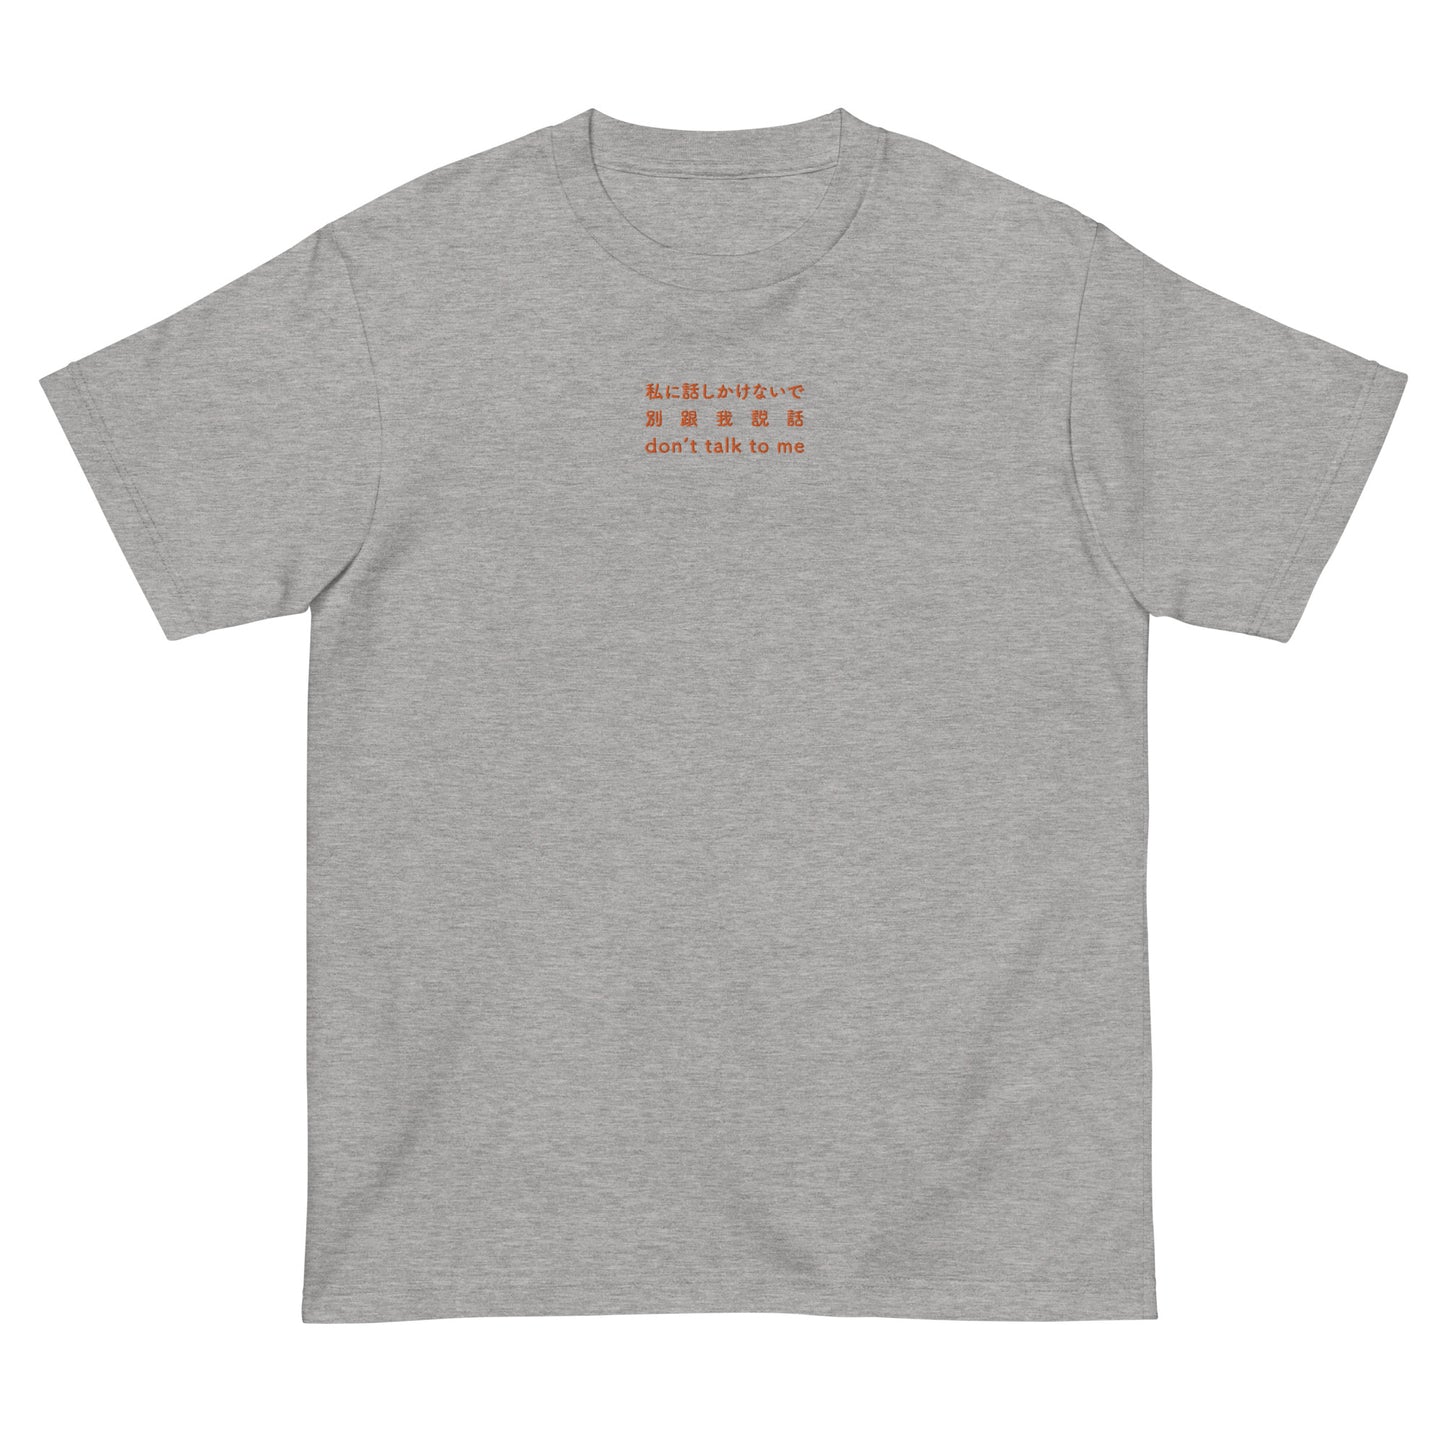 Light Gray High Quality Tee - Front Design with an Orange Embroidery "don't talk to me" in Japanese,Chinese and English